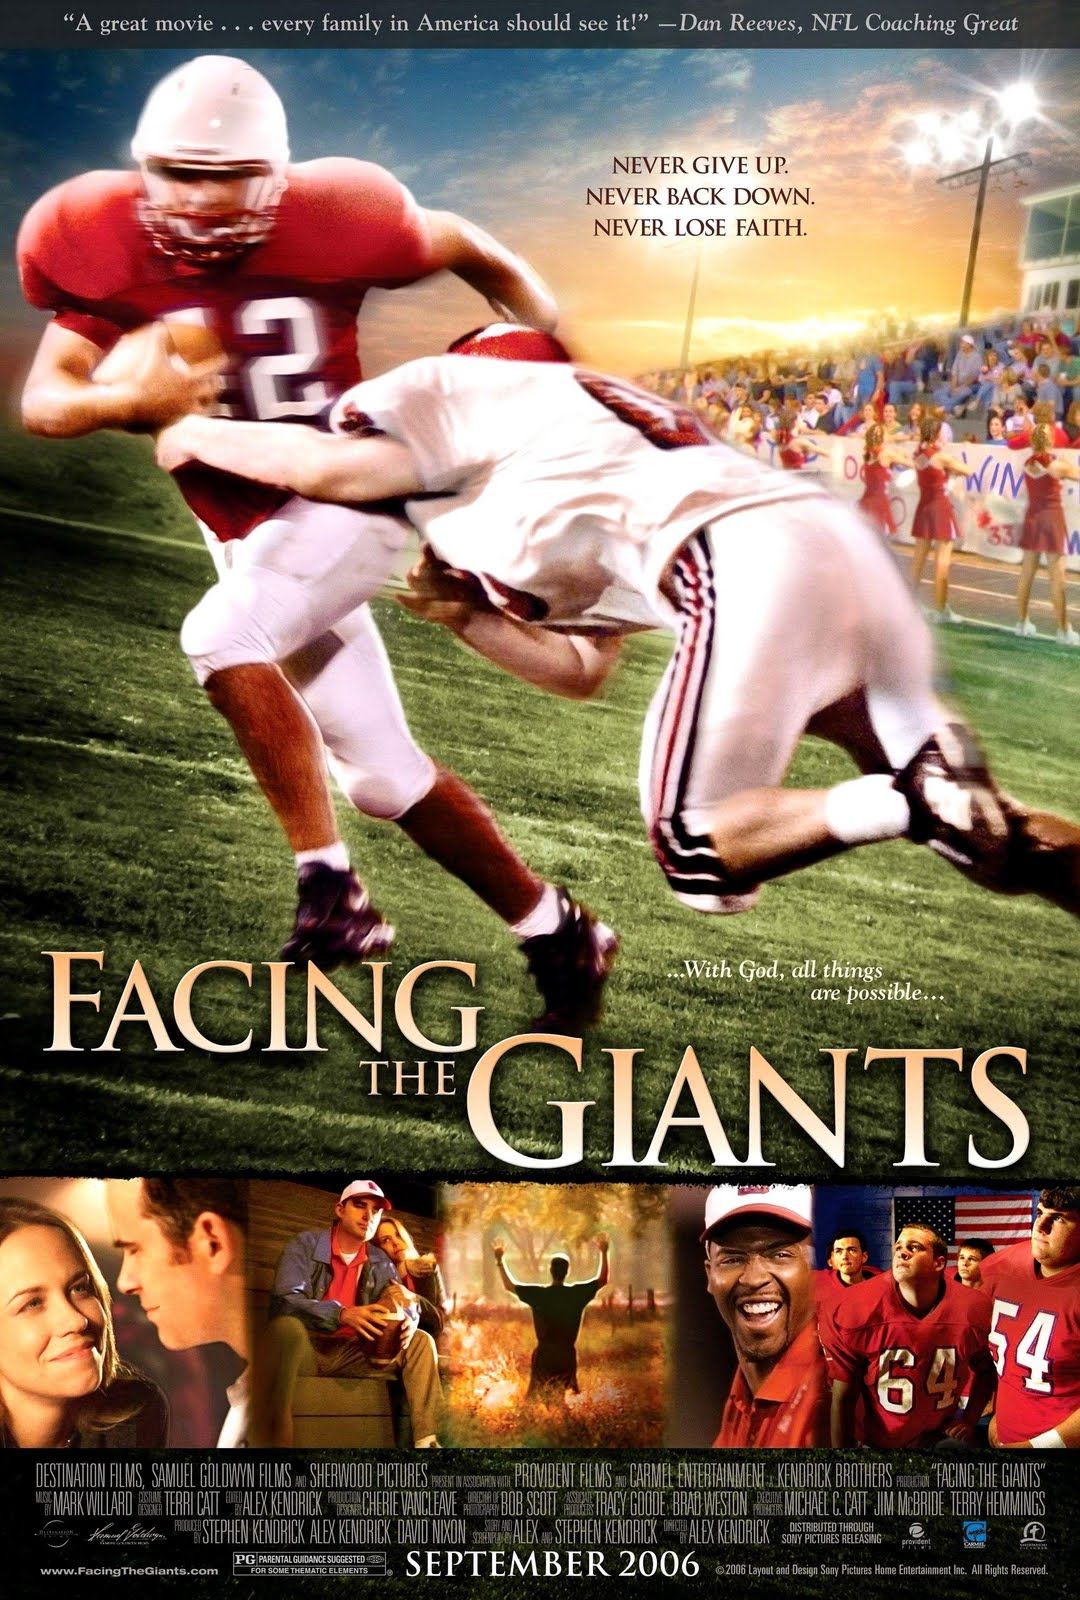 FULL MOVIE: Facing The Giants (2006)